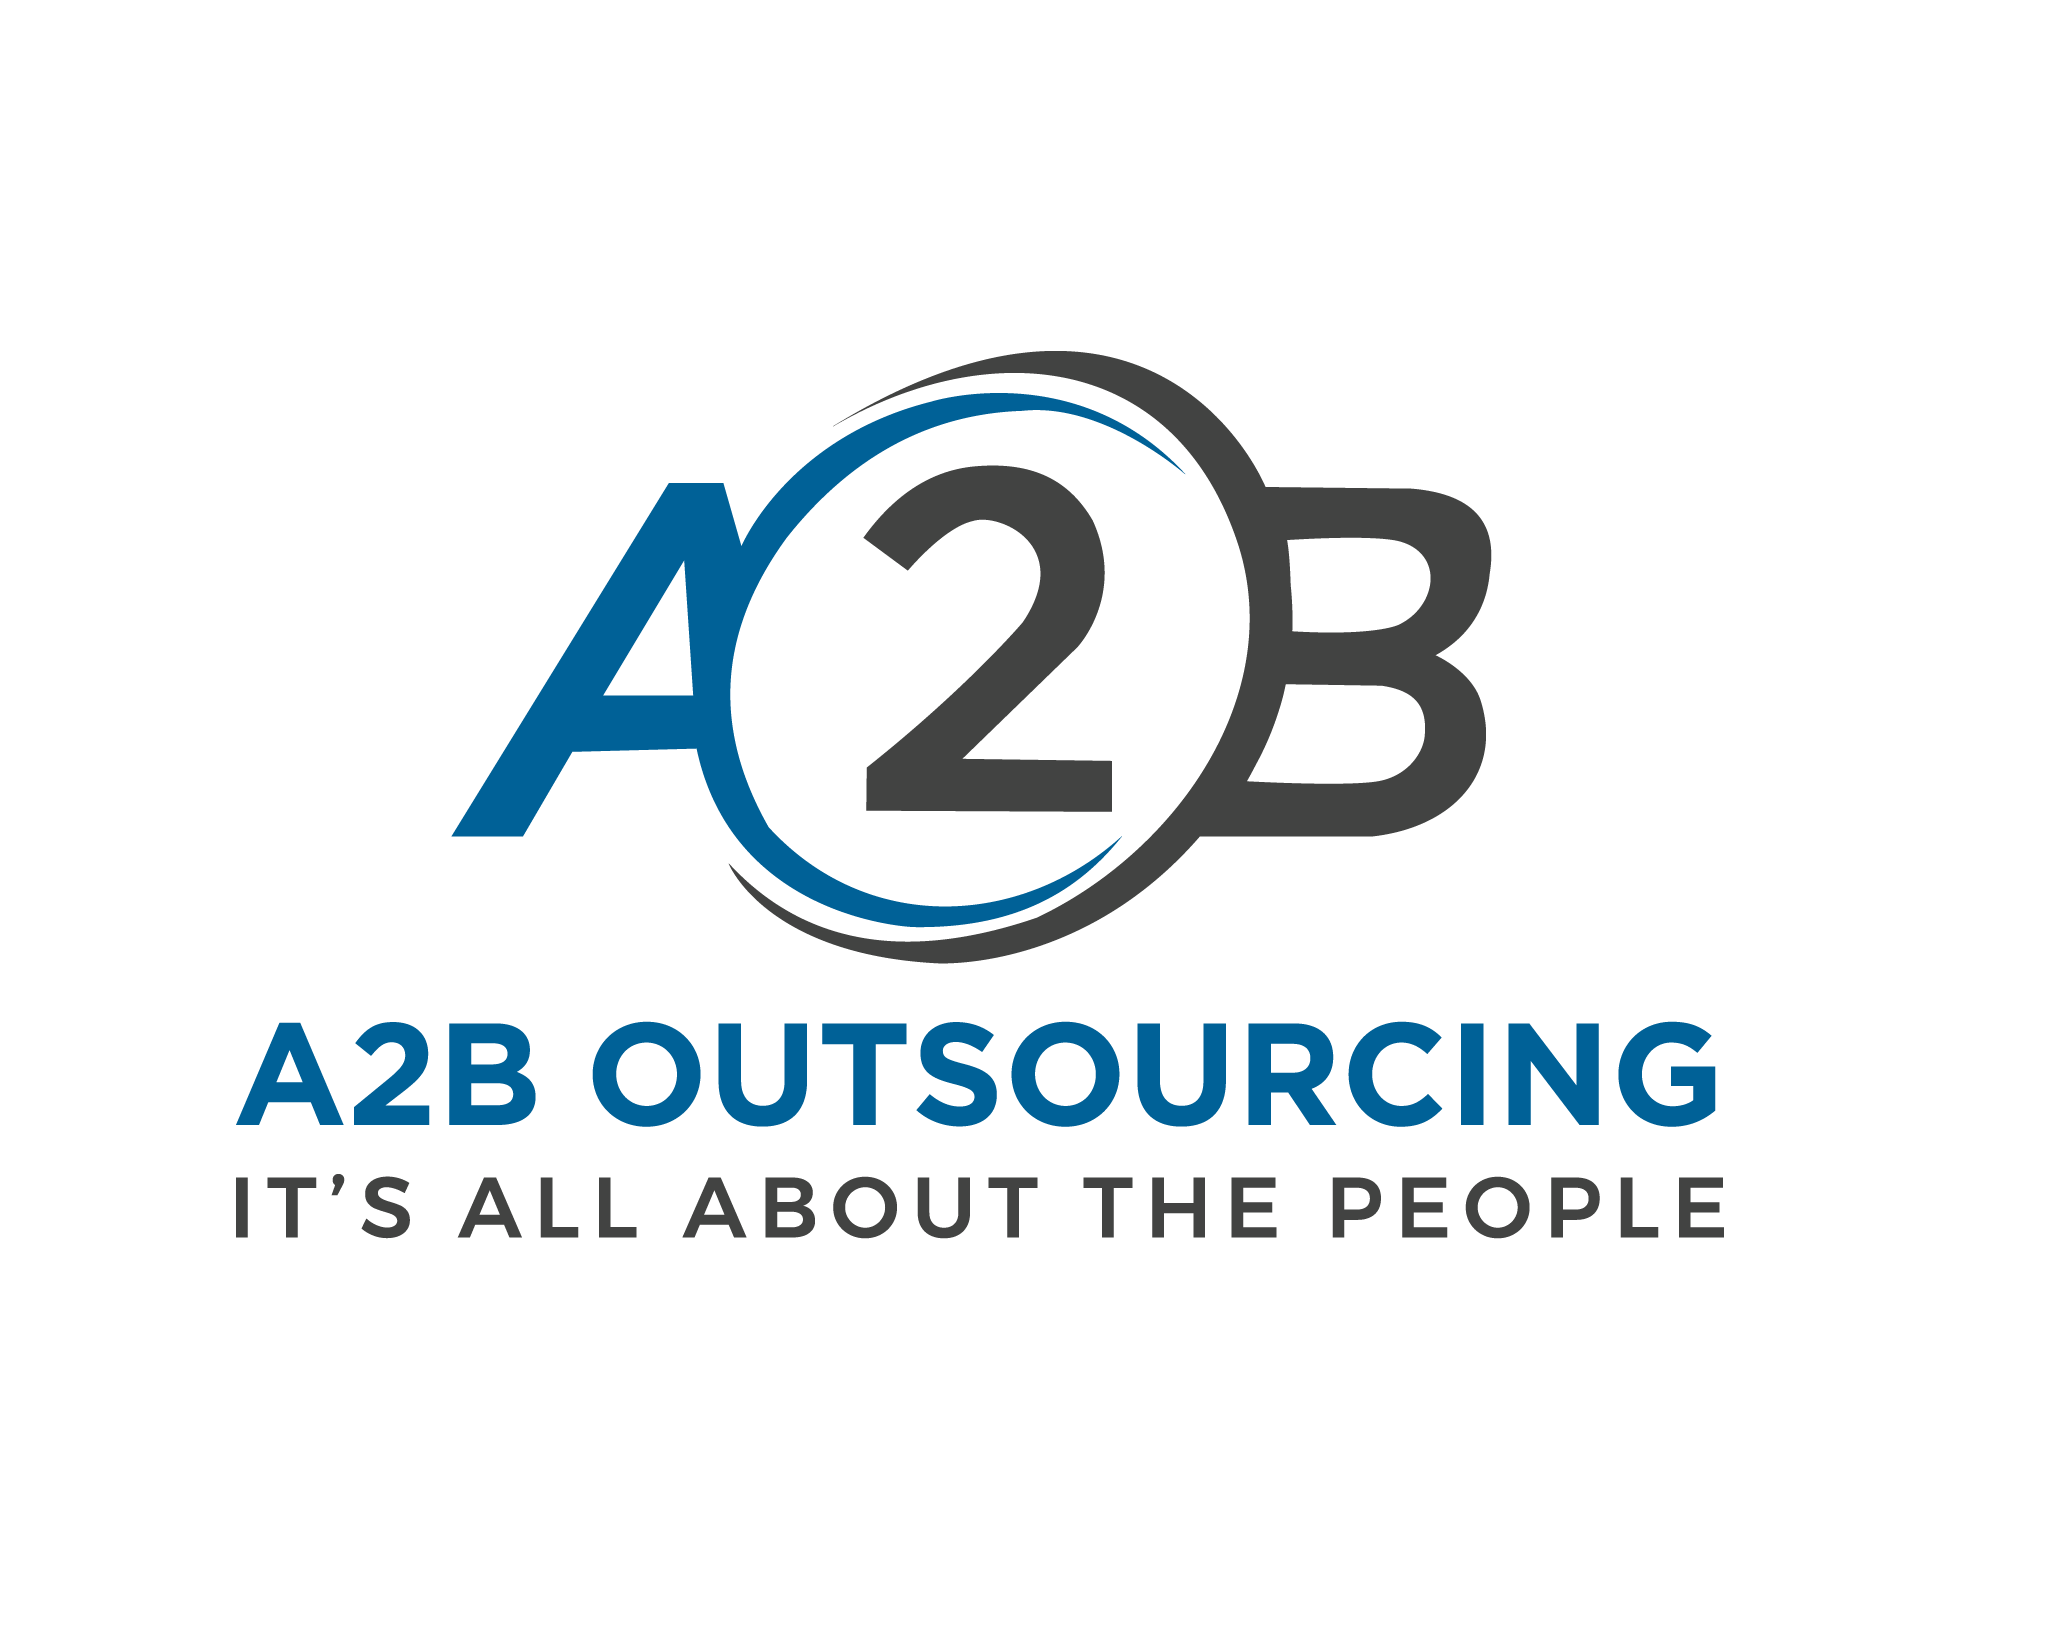 ABC A2B OUTSOURCING PHILIPPINES PTY LTD.